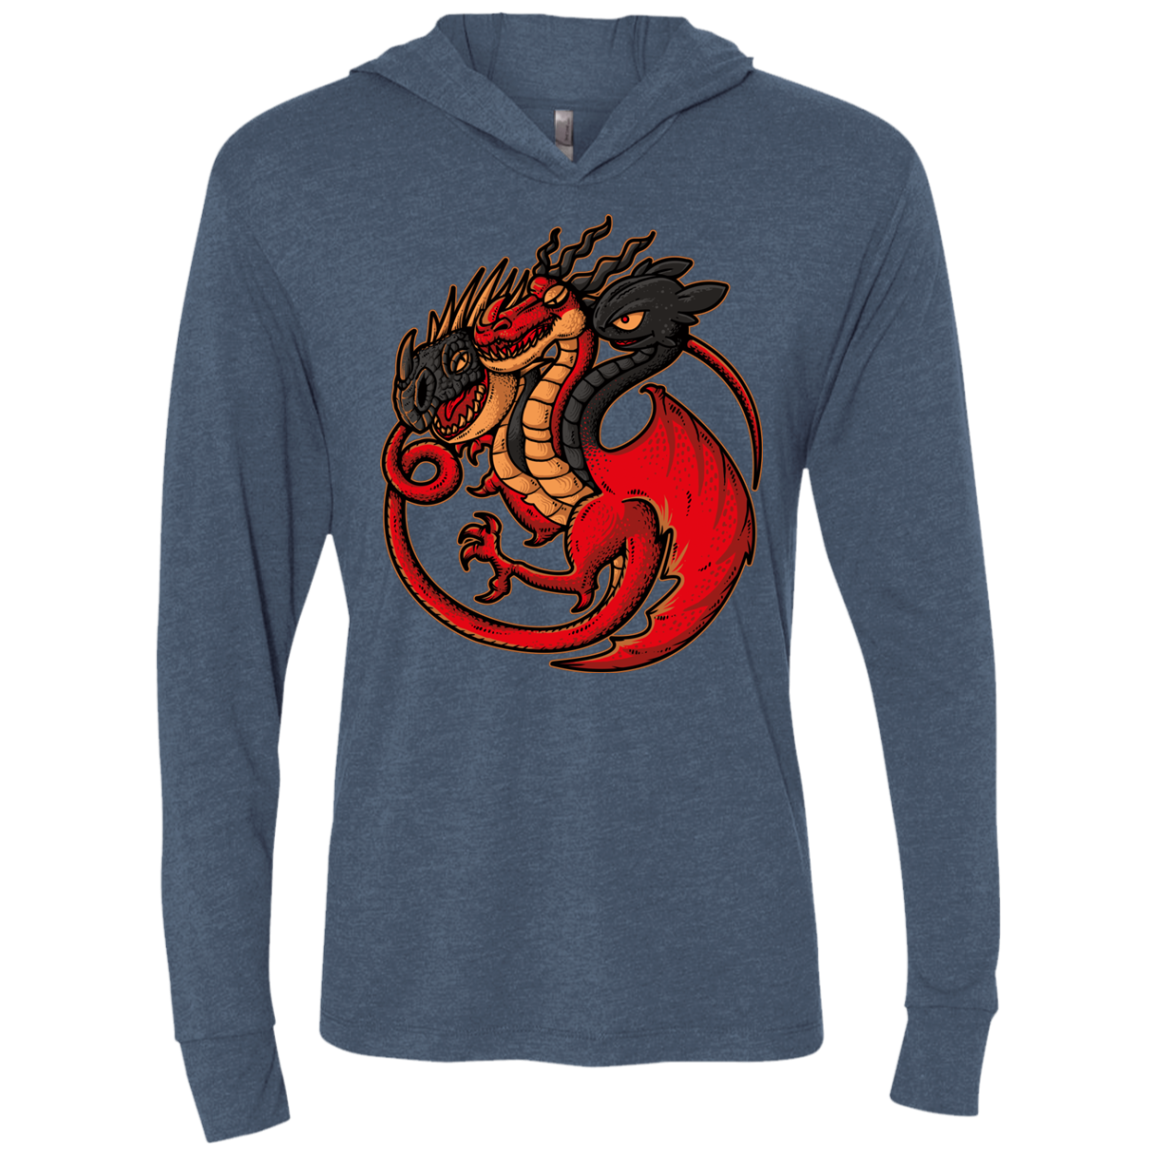 FIRE BLOOD AND TRAINING Triblend Long Sleeve Hoodie Tee